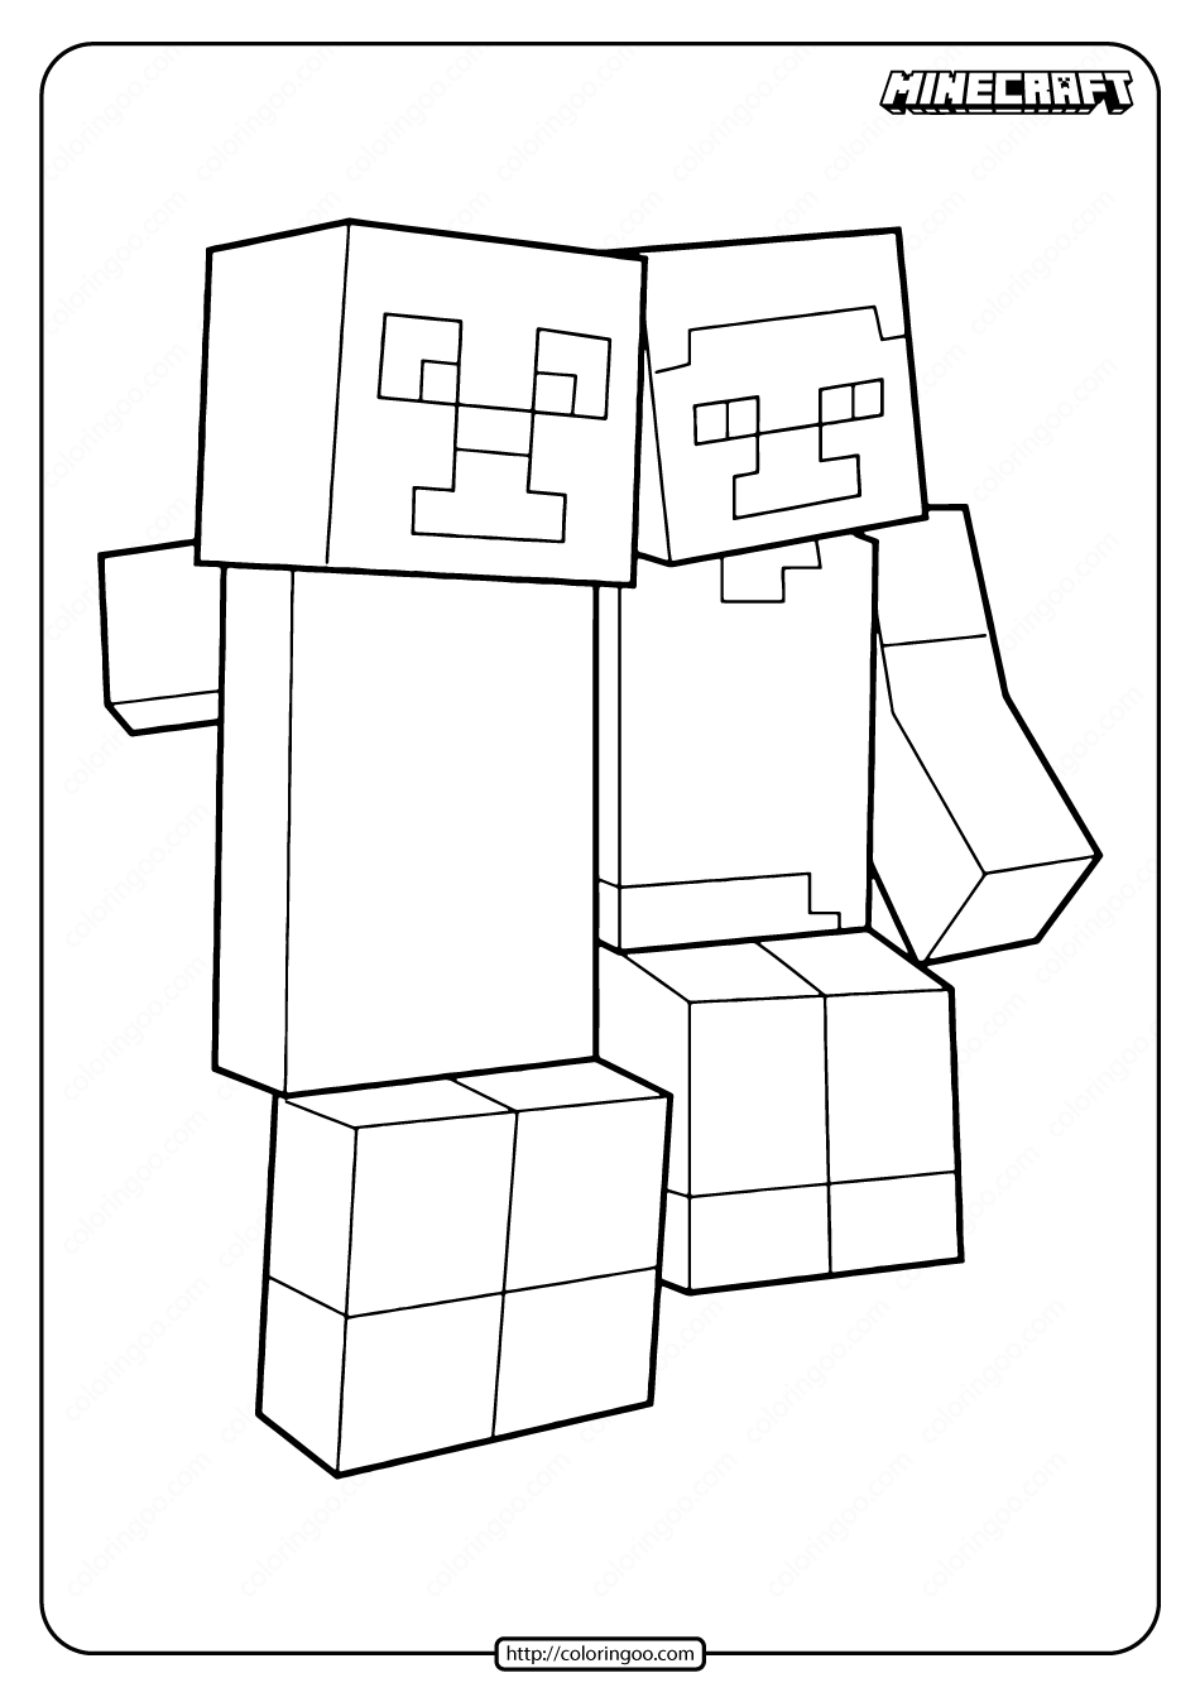 Minecraft Creeper and Steve Coloring Pages